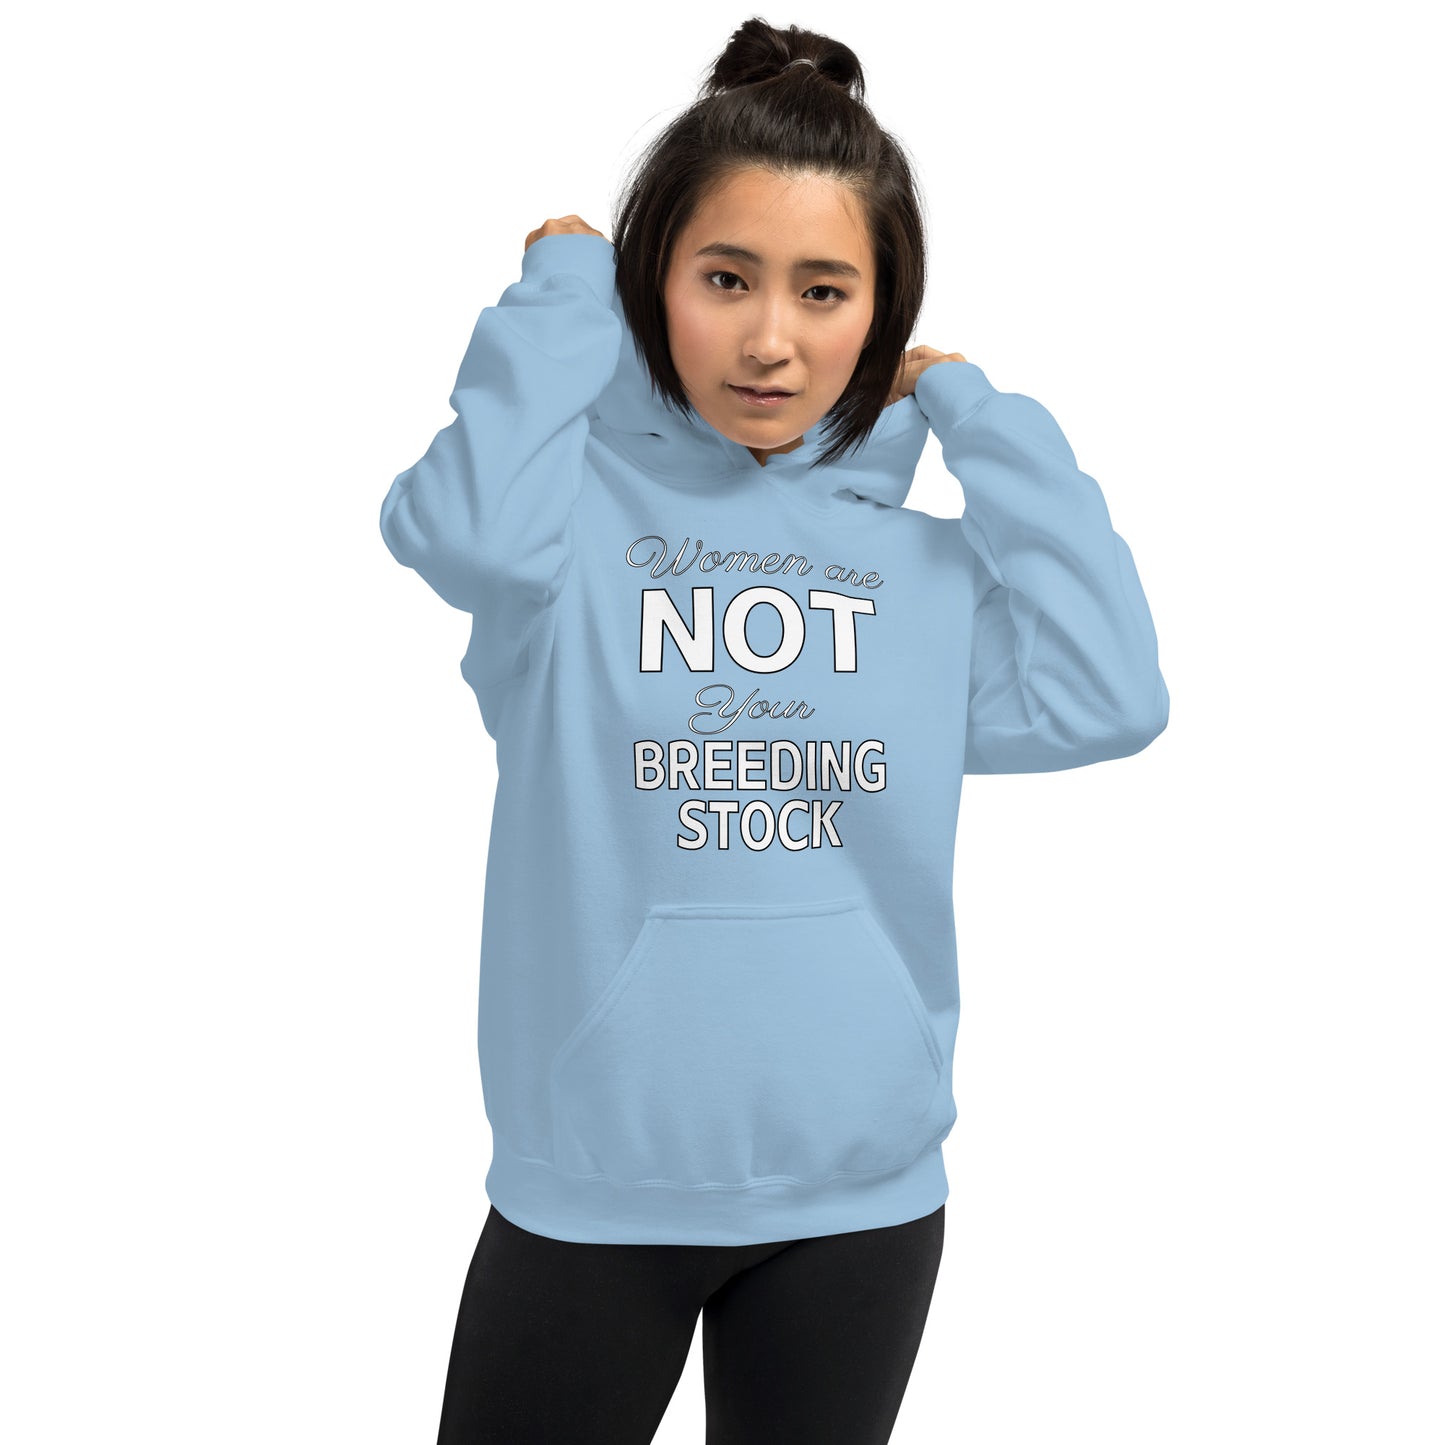 Women Are Not Your Breeding Stock Hoodie